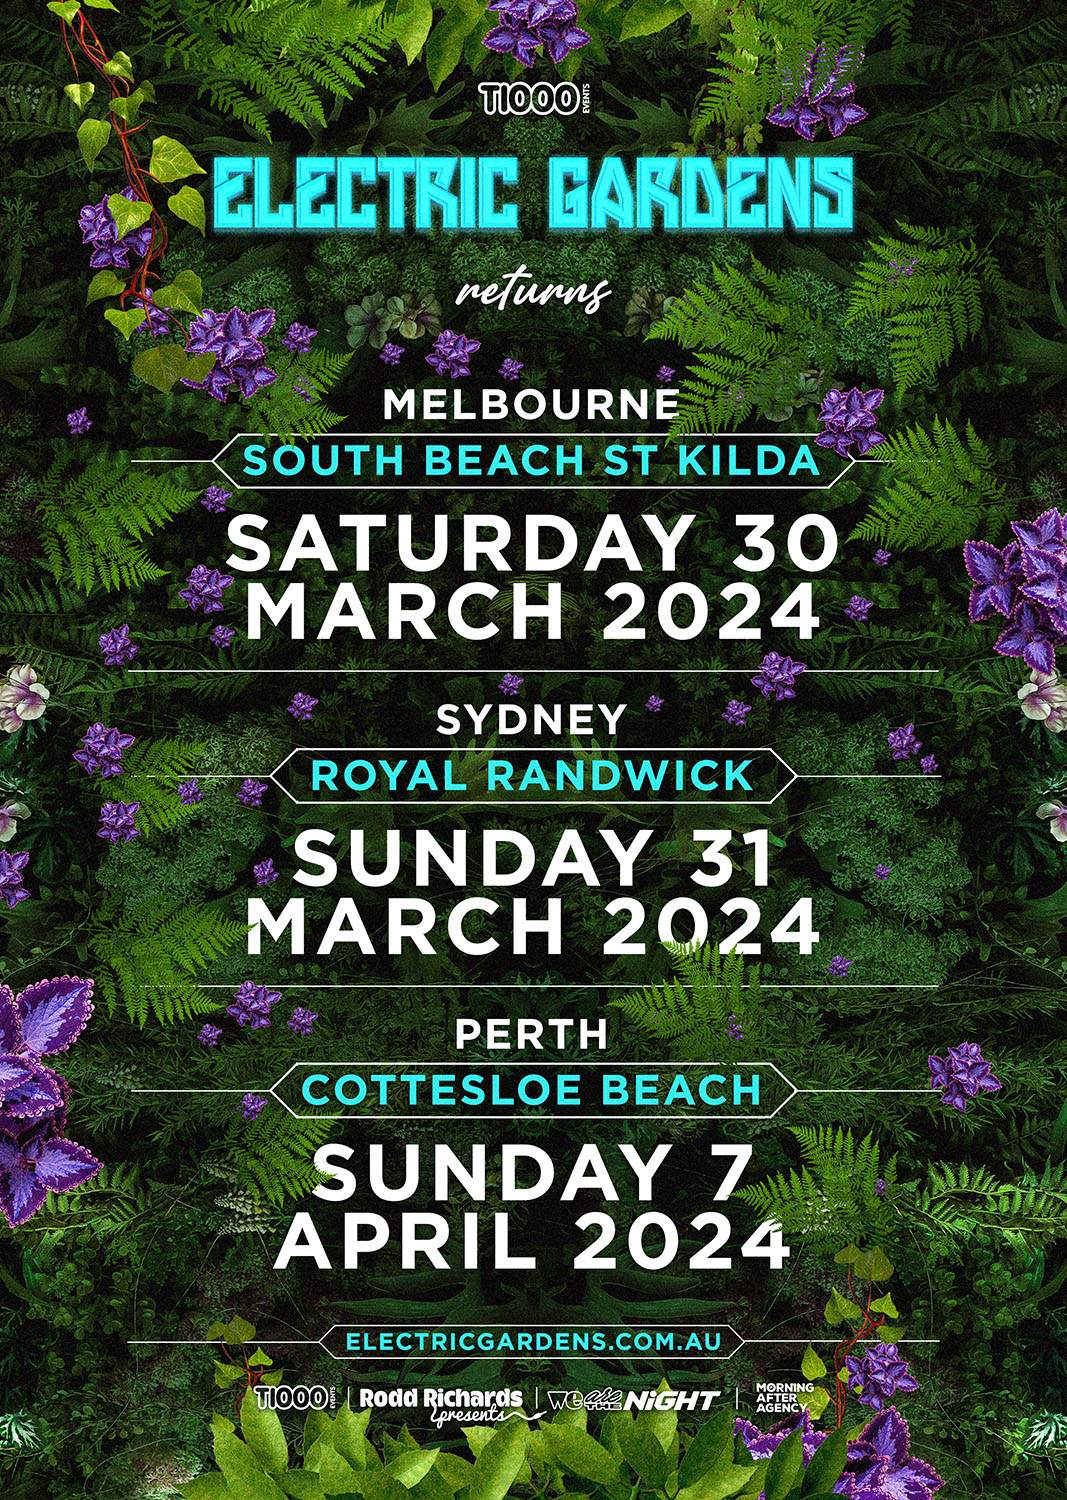 Electric Gardens Music Festival Returns in 2024 at Cottesloe Beach